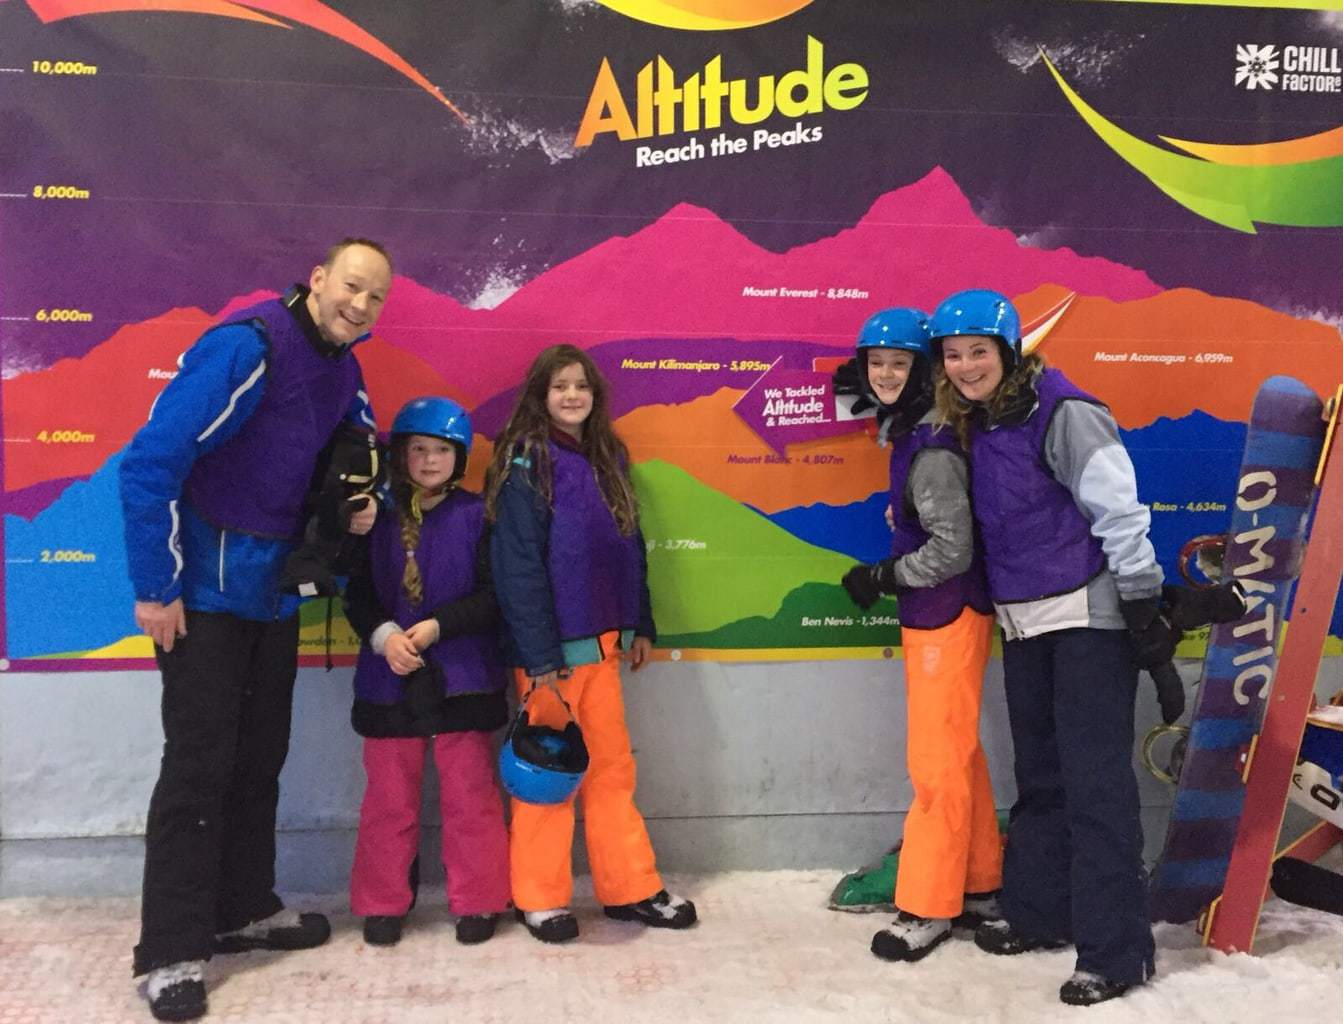 Altitude Activity at the Manchester Chill Factore’s Snow Park